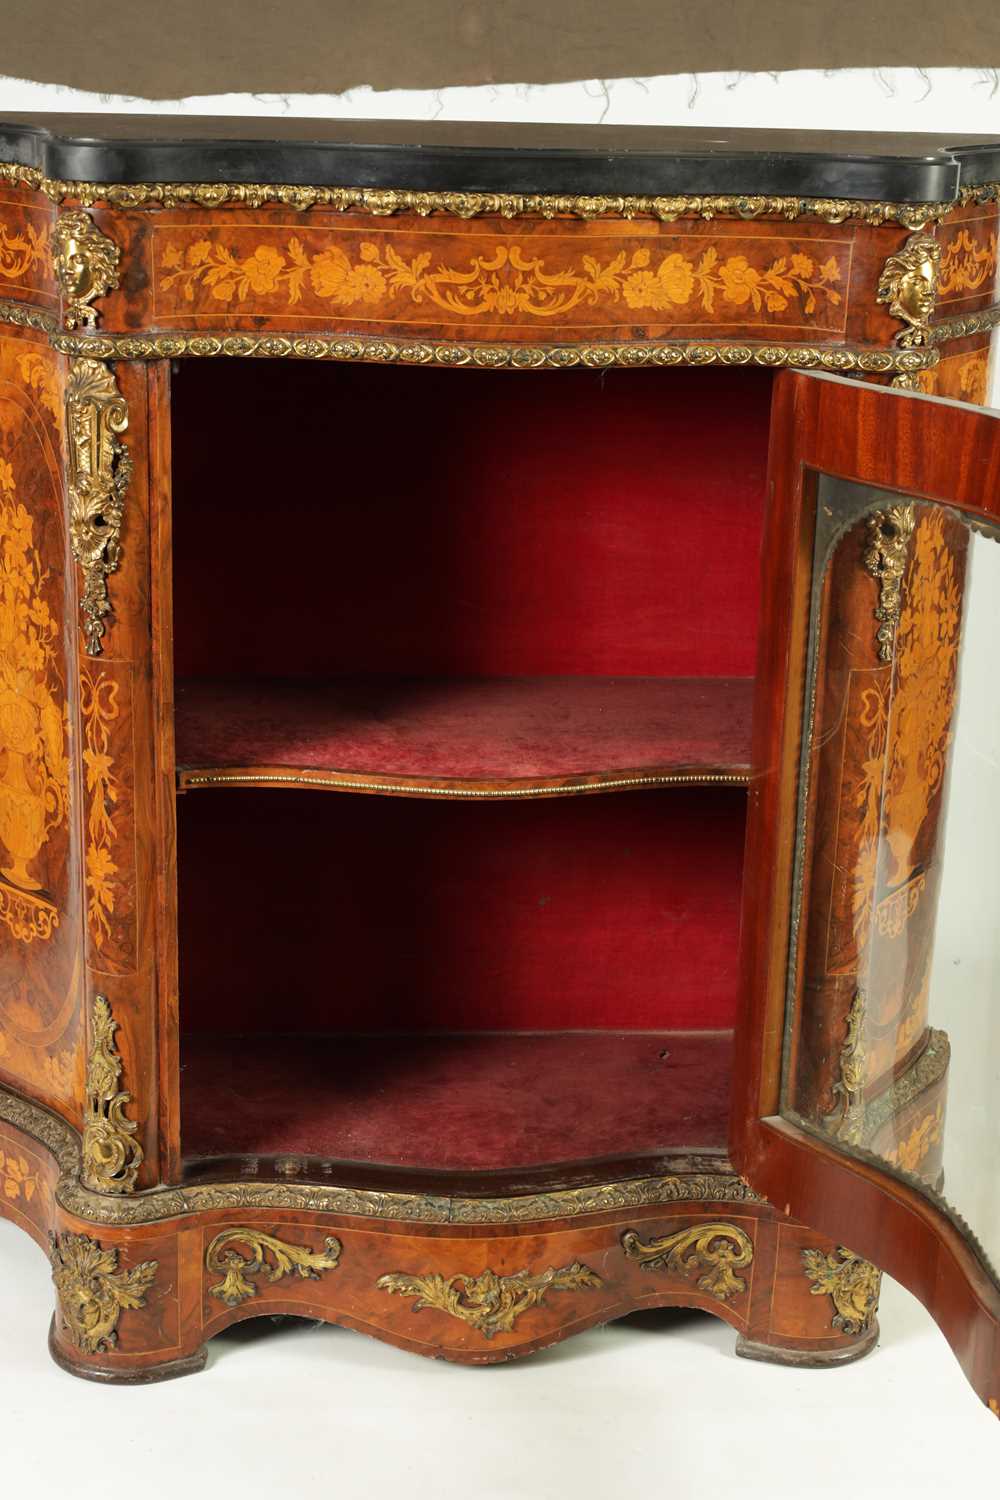 A FINE 19TH CENTURY ORMOLU MOUNTED WALNUT AND FLORAL MARQUETRY INLAID SERPENTINE SIDE CABINET - Image 13 of 16